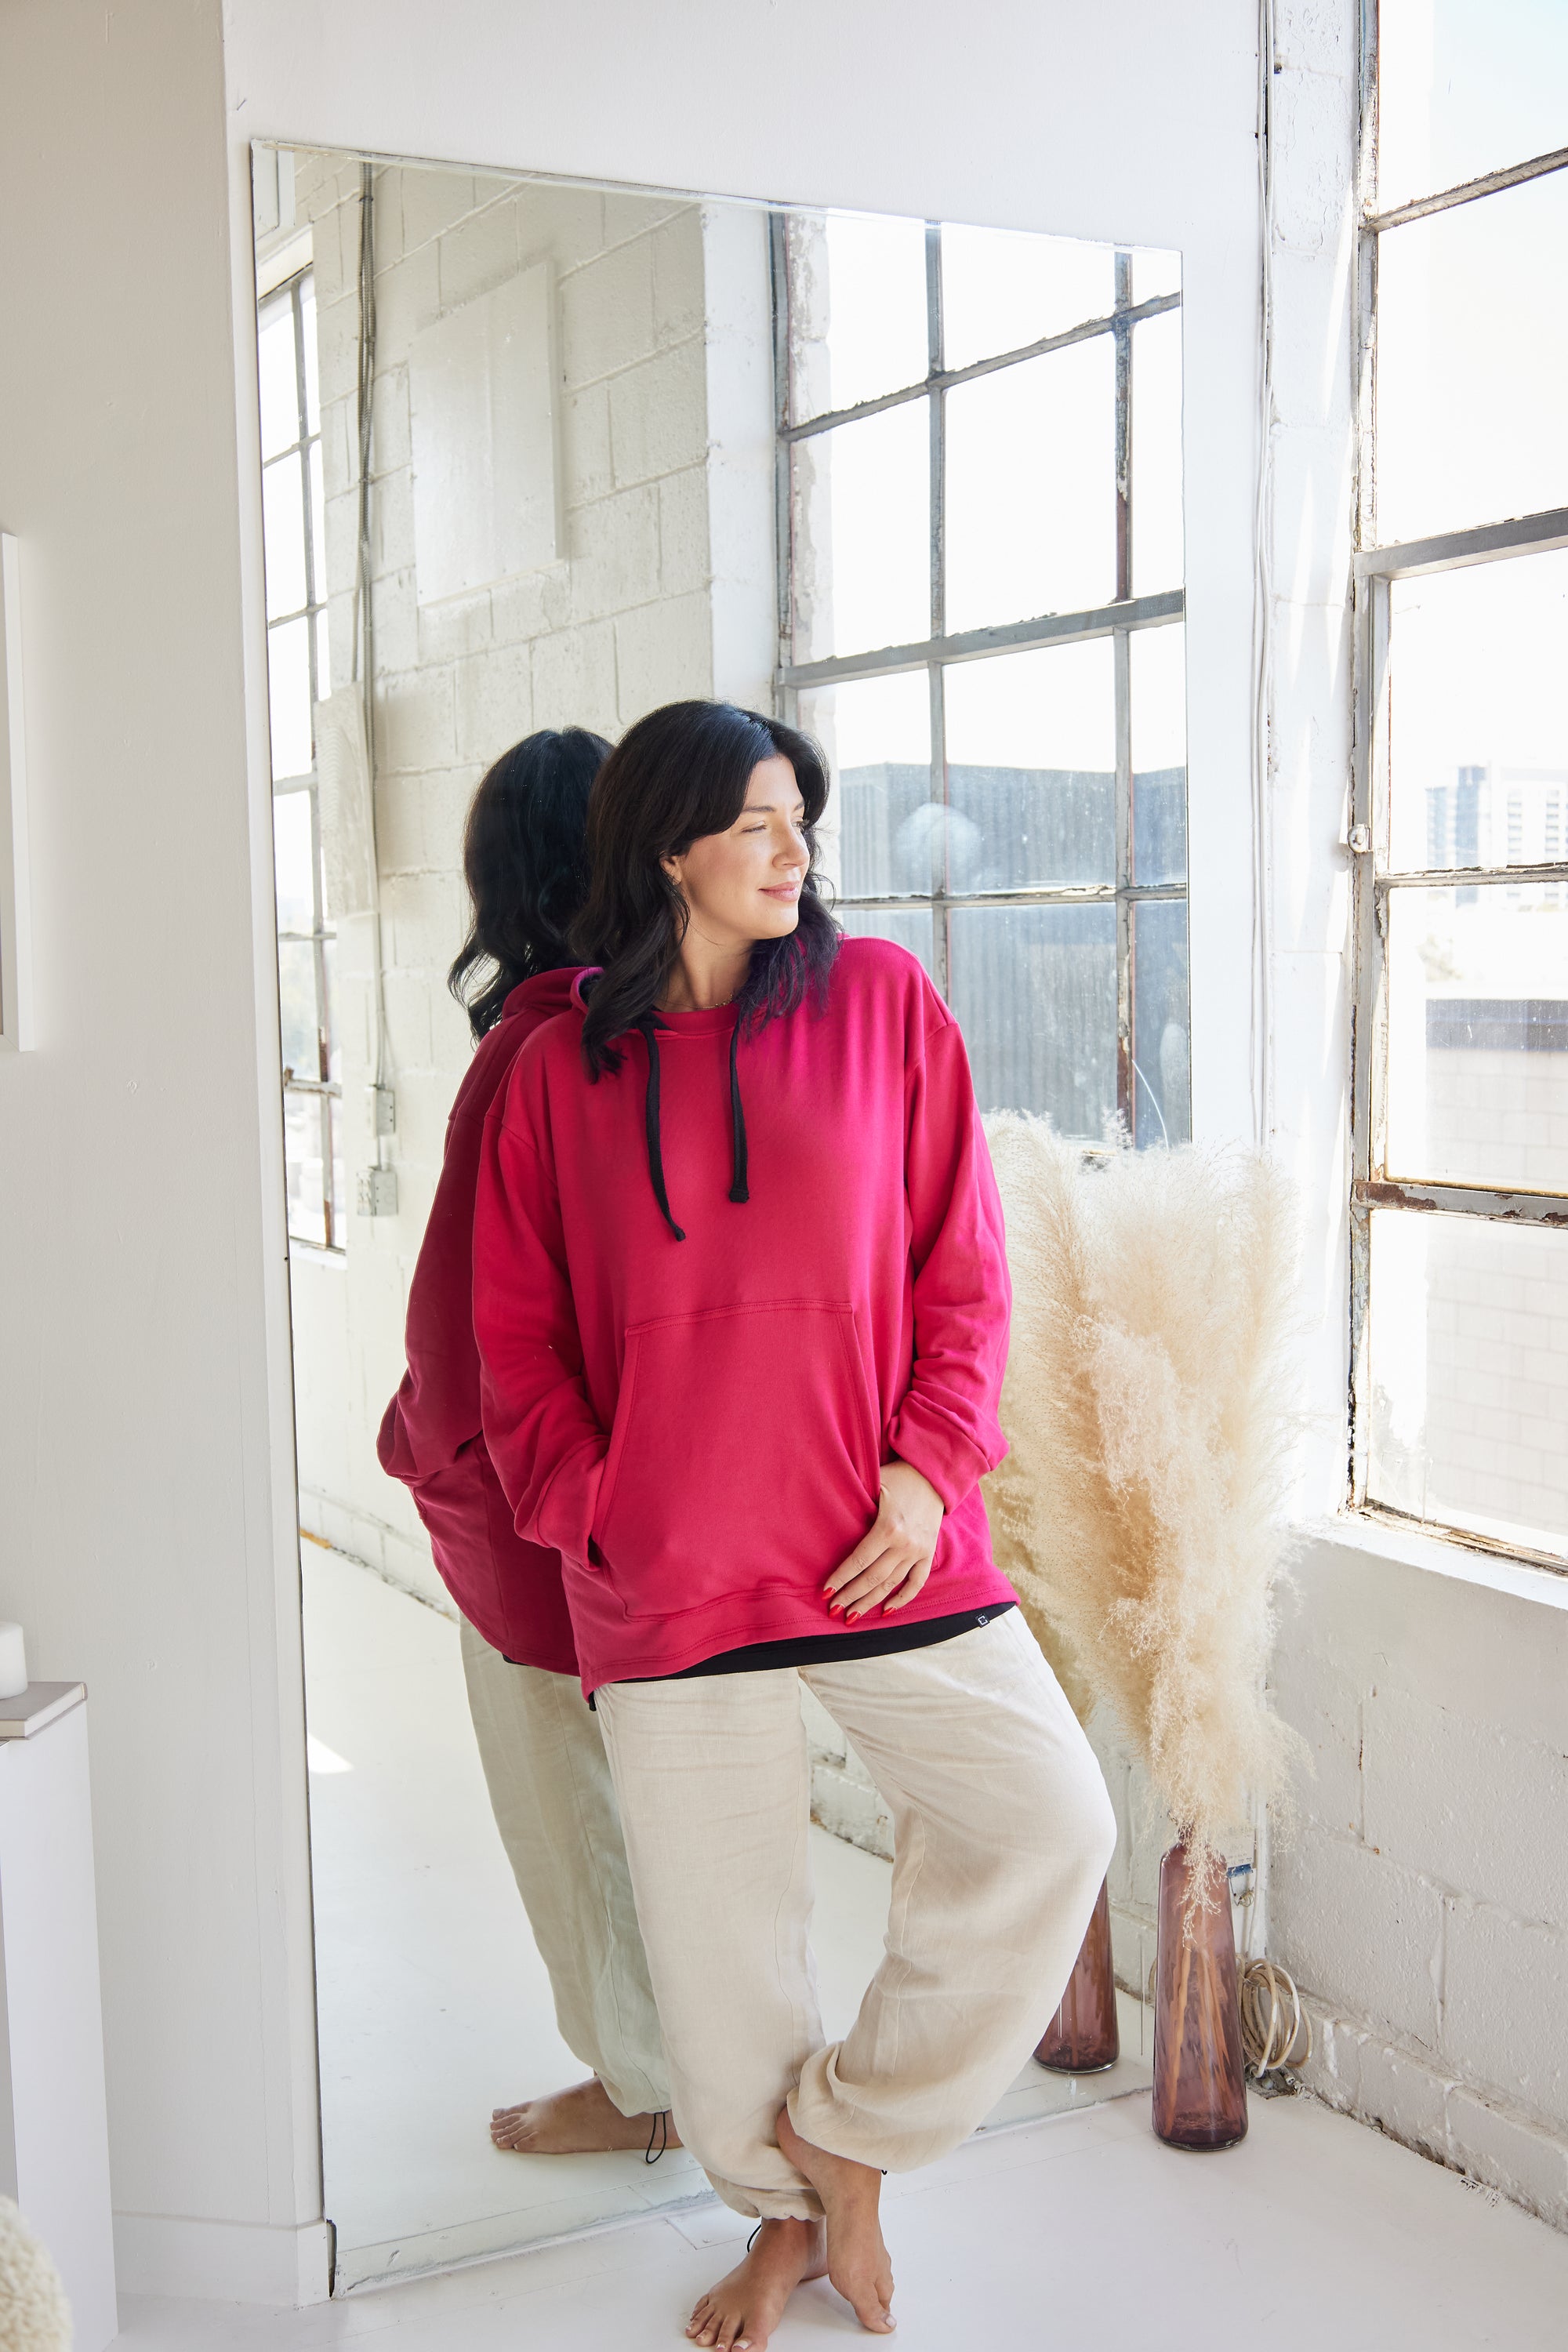 The Cherry Hoodie by Cassandra Elizabeth is an ethically made, minimalist wardrobe essential, and is the epitome of quiet luxury.